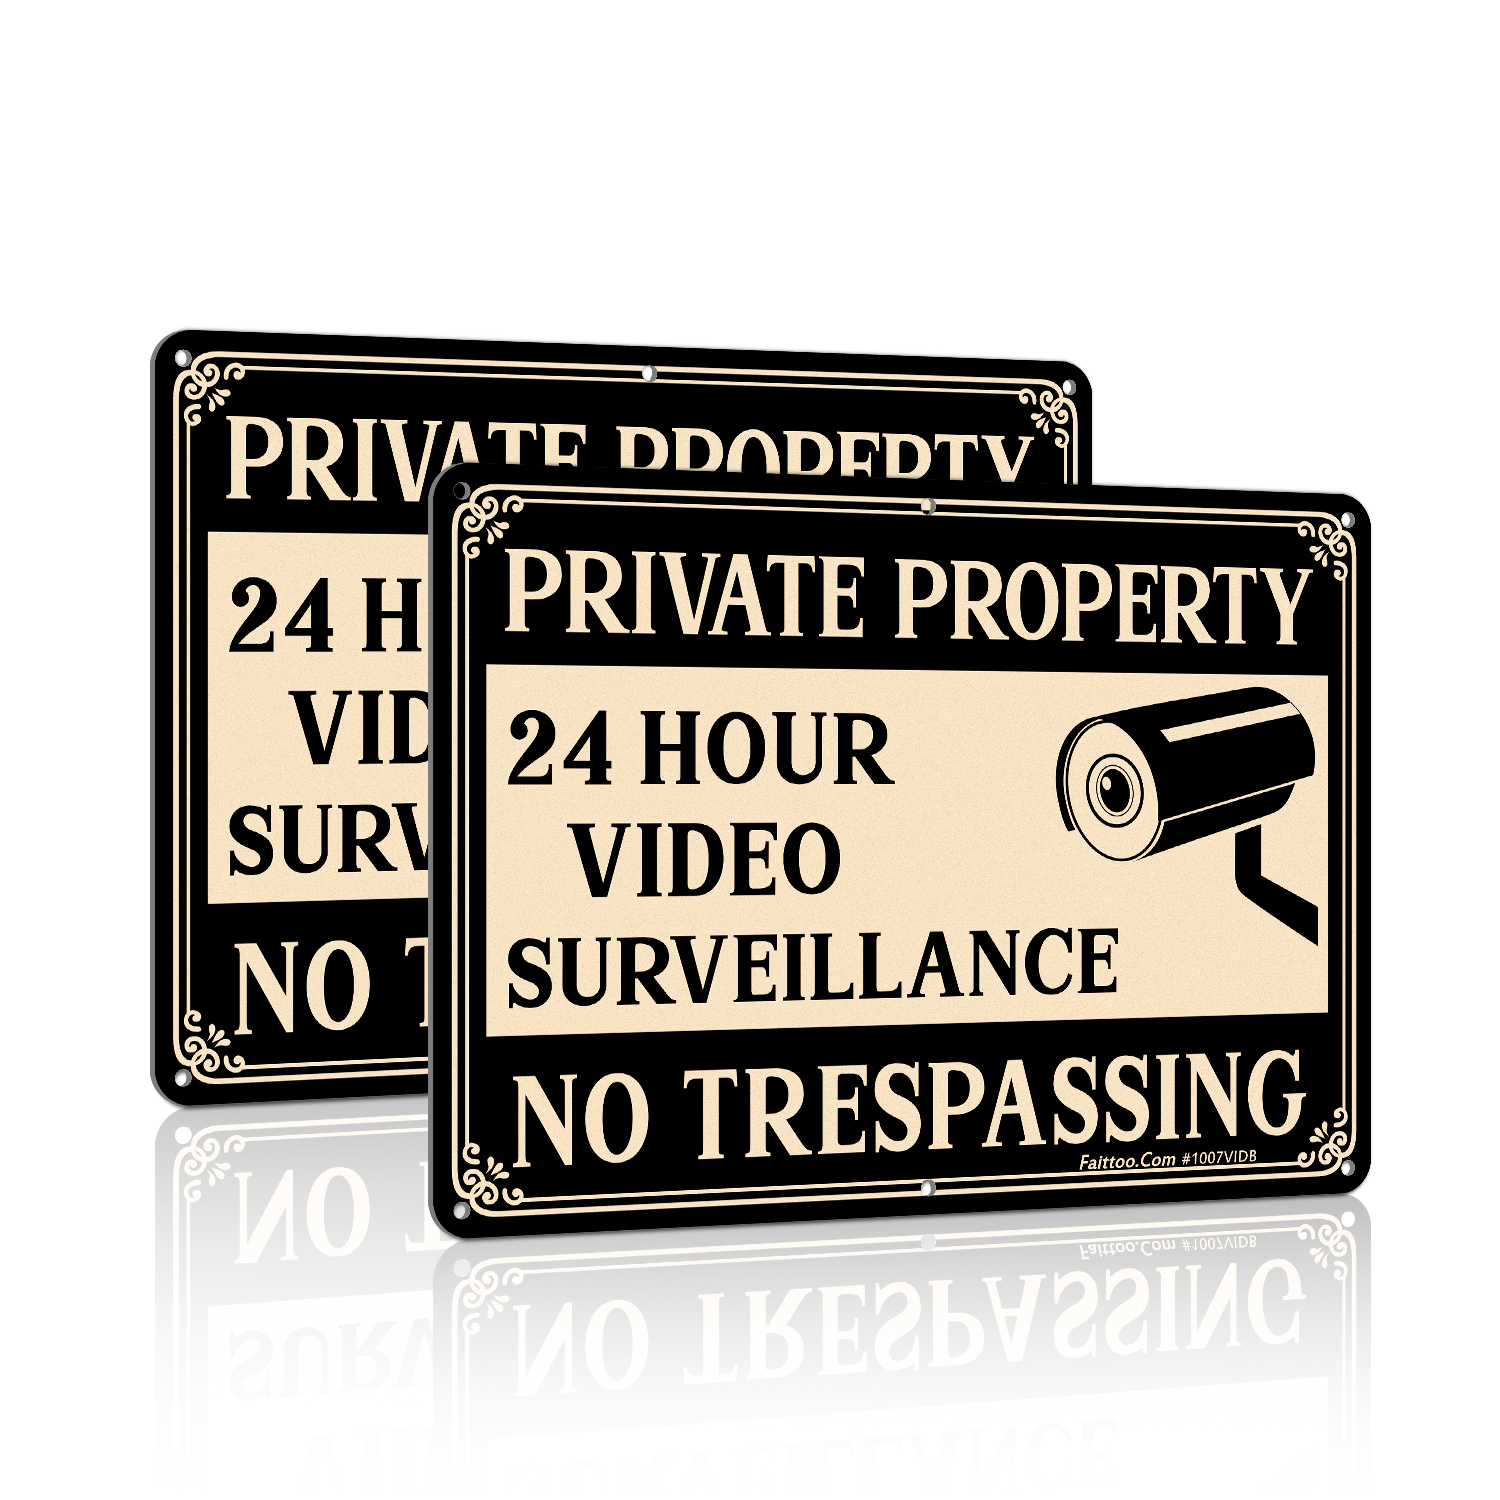 Faittoo Private Property No Trespassing Sign, Video Surveillance Signs Outdoor, 2-Pack 10 x 7 Inch Reflective Aluminum Warning Sign for Home Business Security Camera, Weather/Fade Resistant